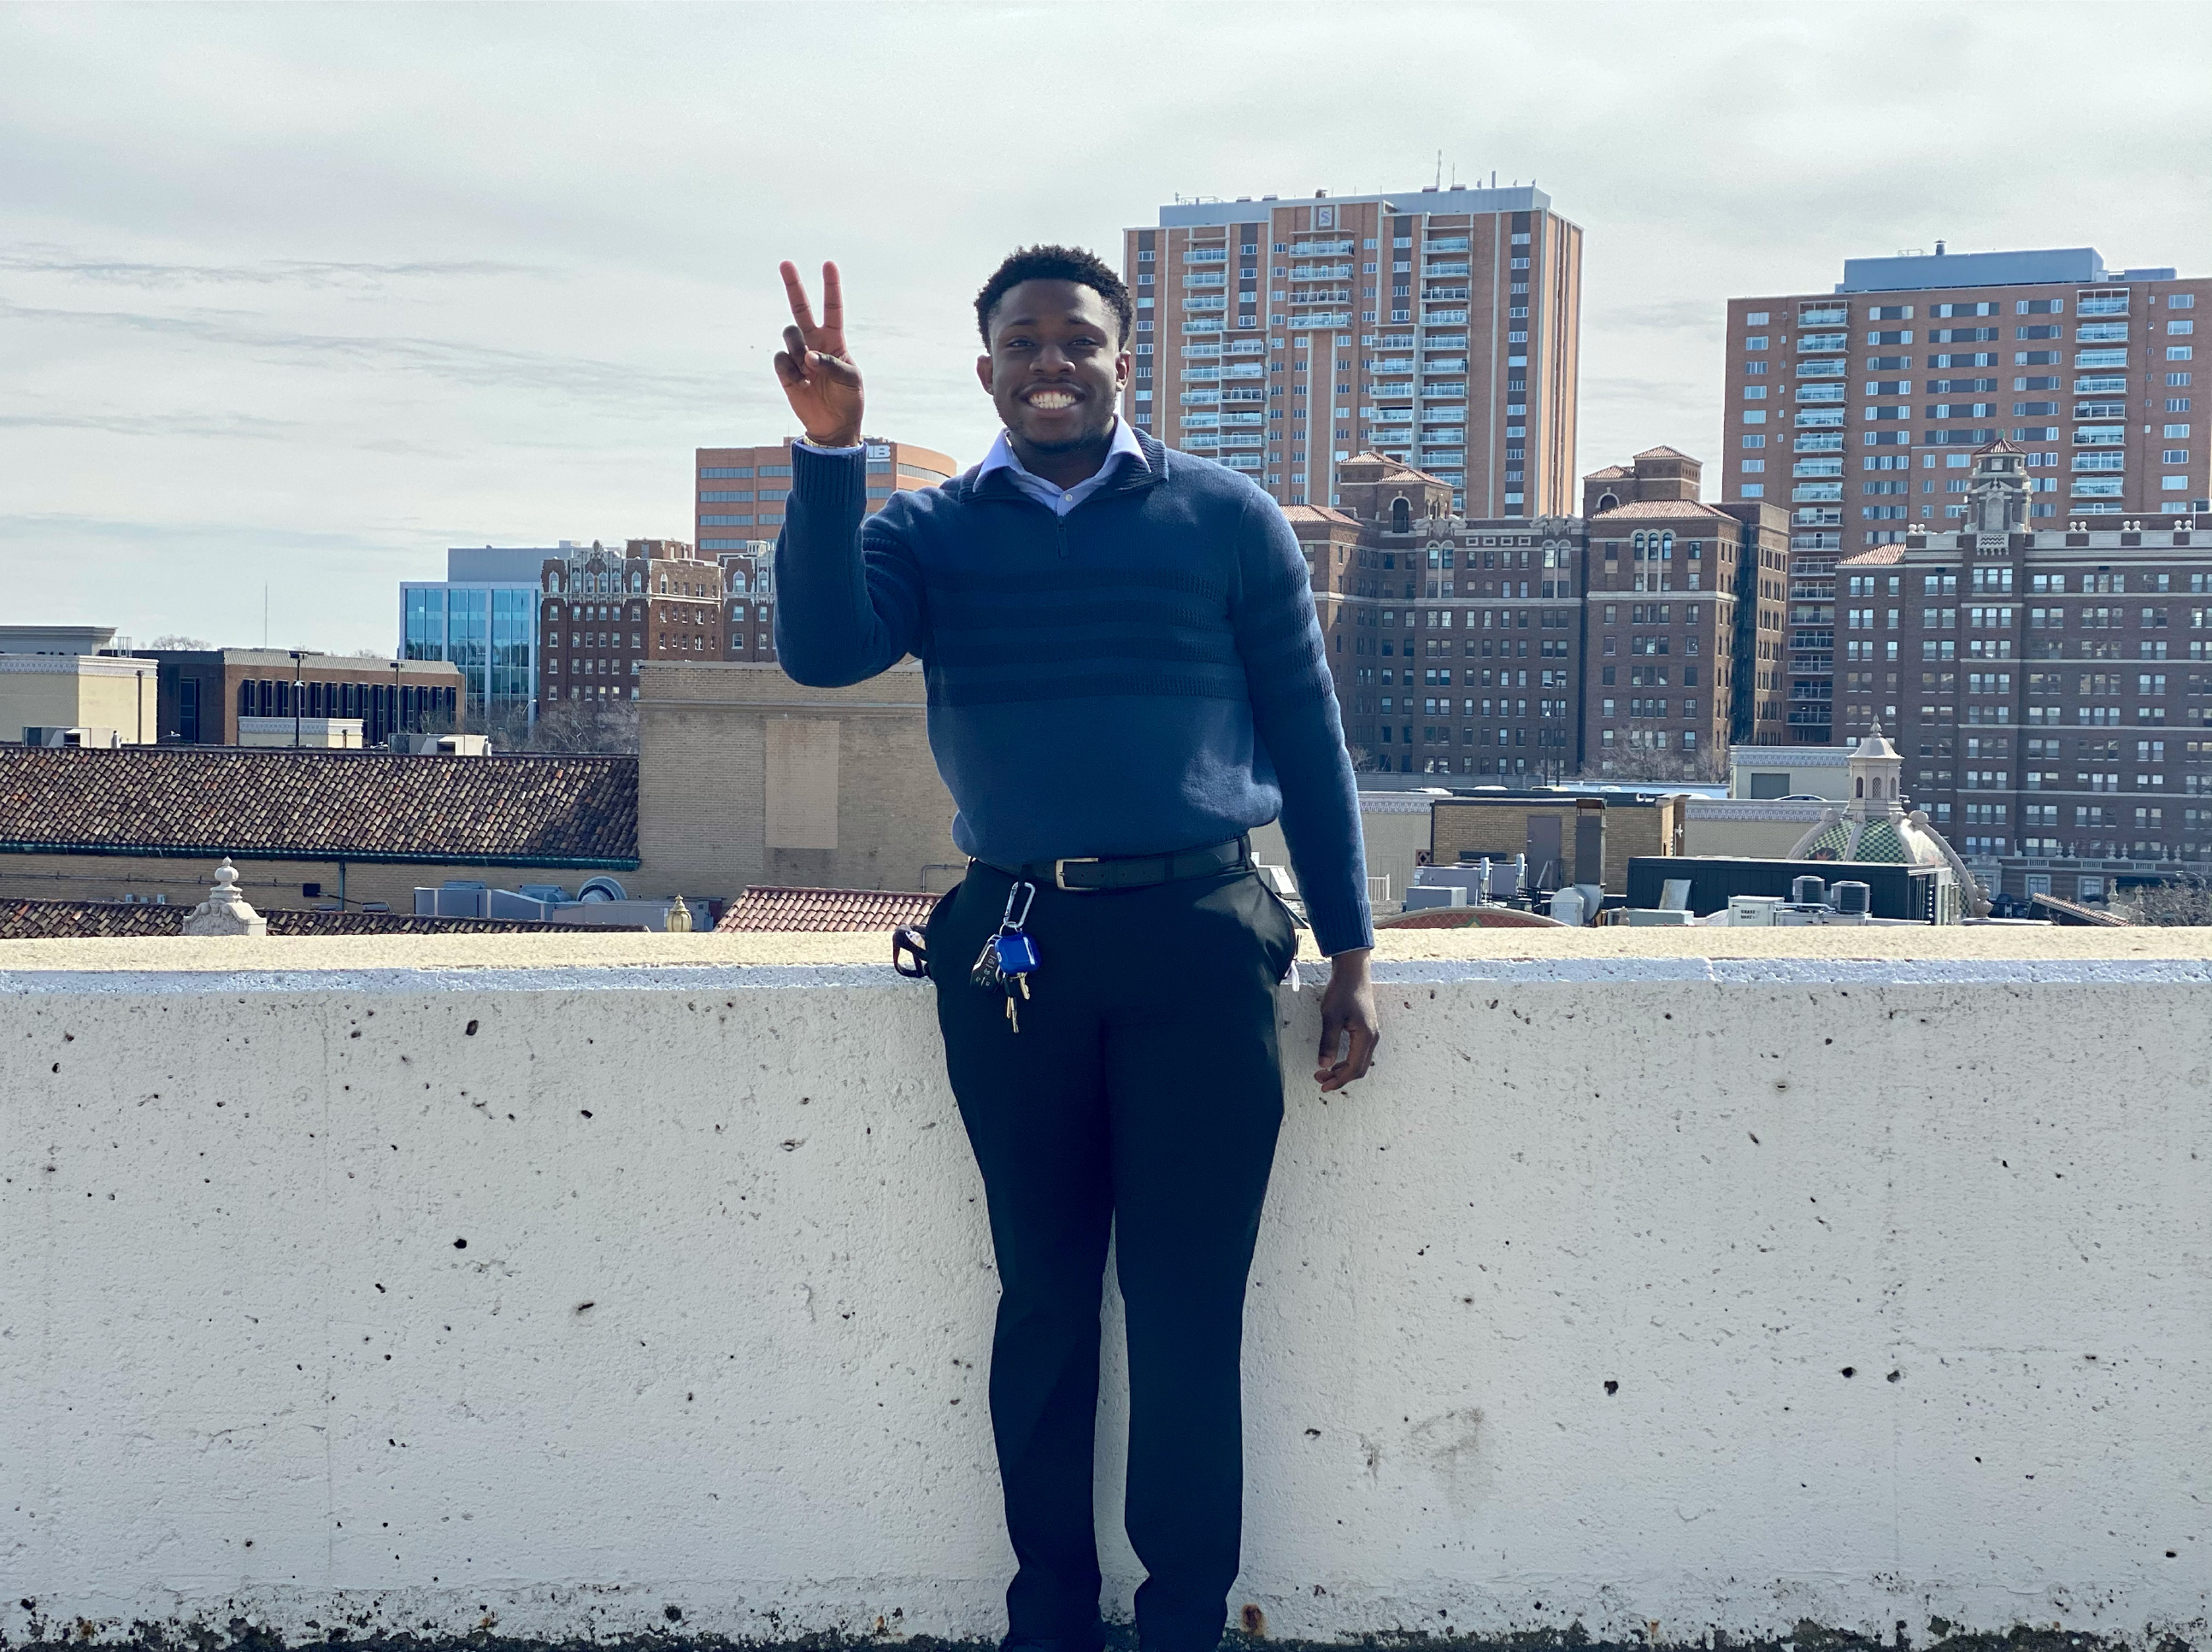 Jeremiah Ikwuwunna graduates from KU this spring with a bachelor’s in literature, language and writing, a minor in law and society 